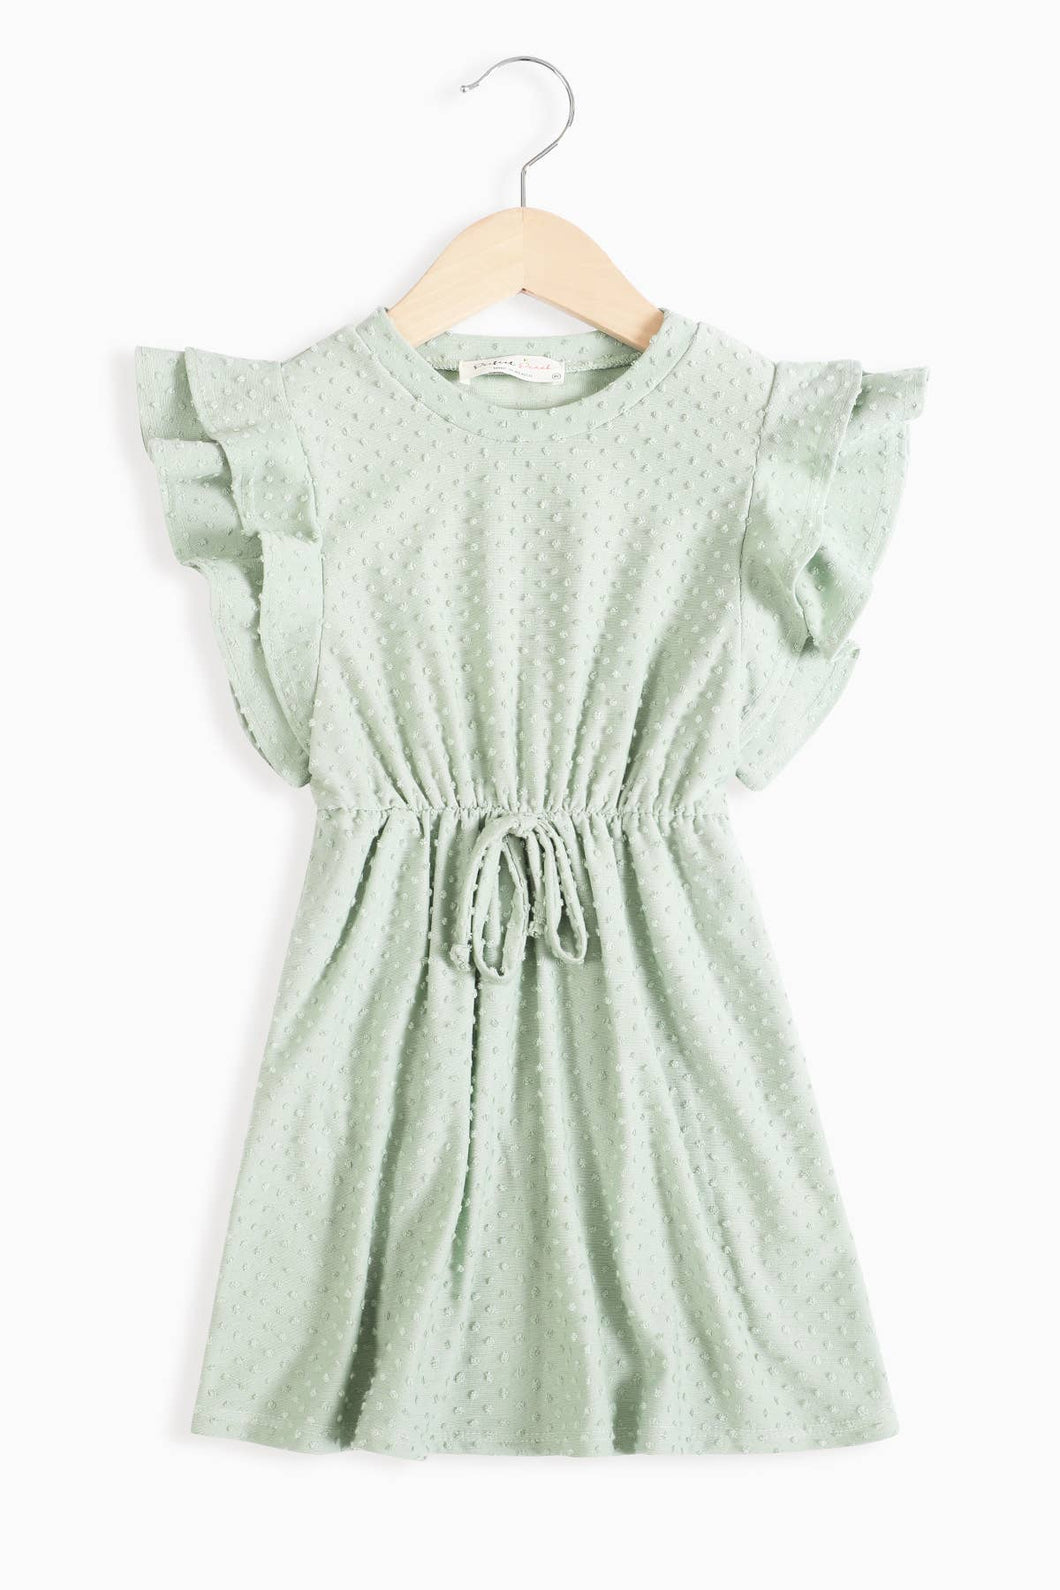 GIRLS RUFFLE SLEEVE FRONT TIE SOLID DRESS